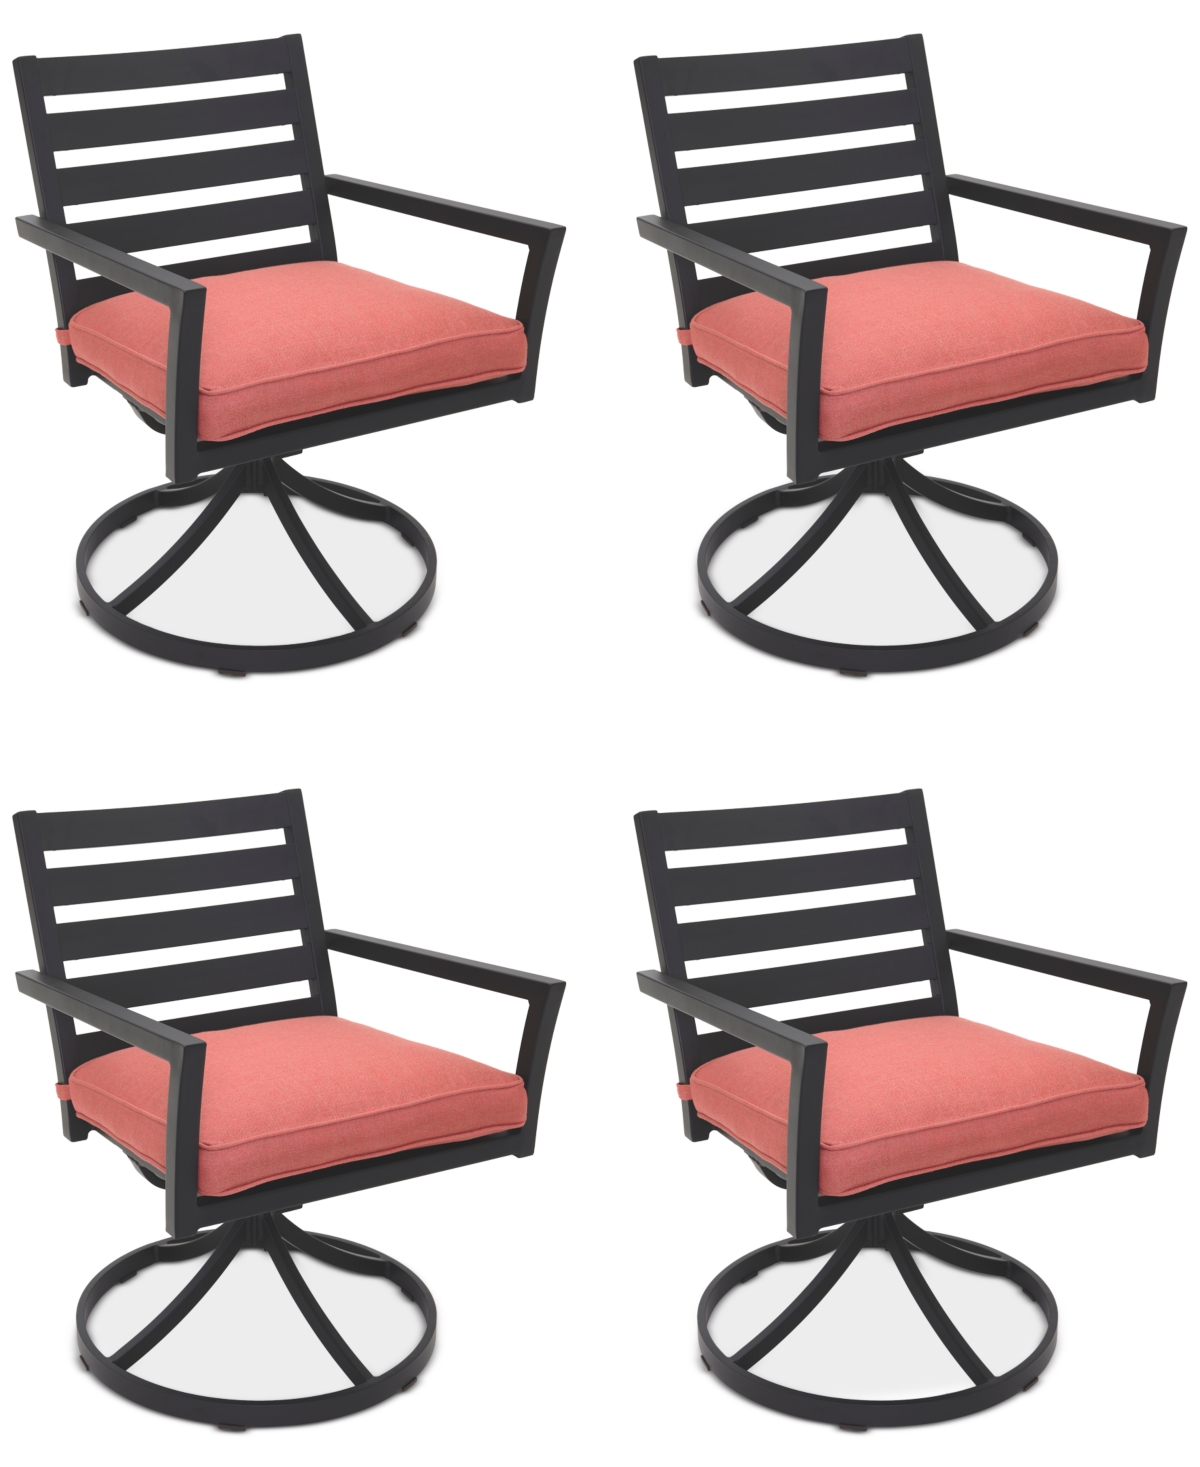 Agio Astaire Outdoor 4-pc Swivel Chair Bundle Set In Peony Brick Red